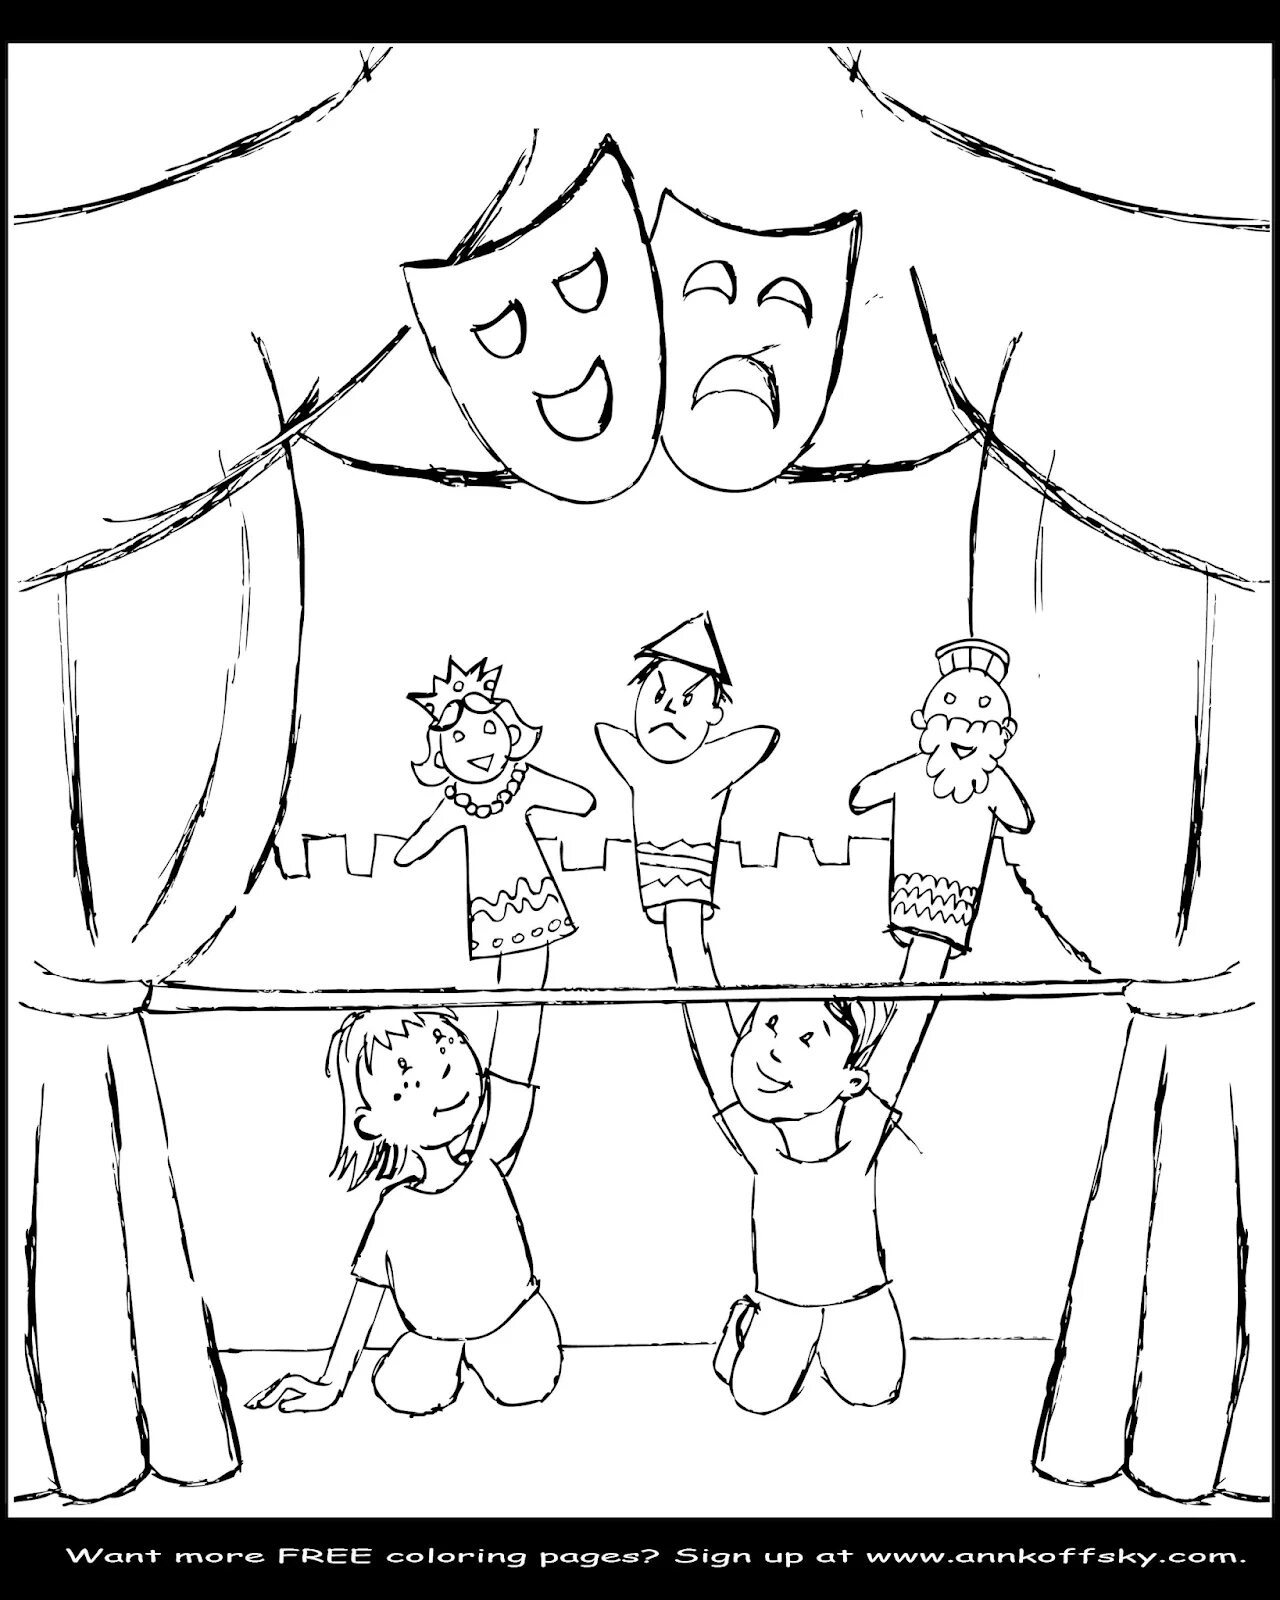 Imaginative theater poster coloring page